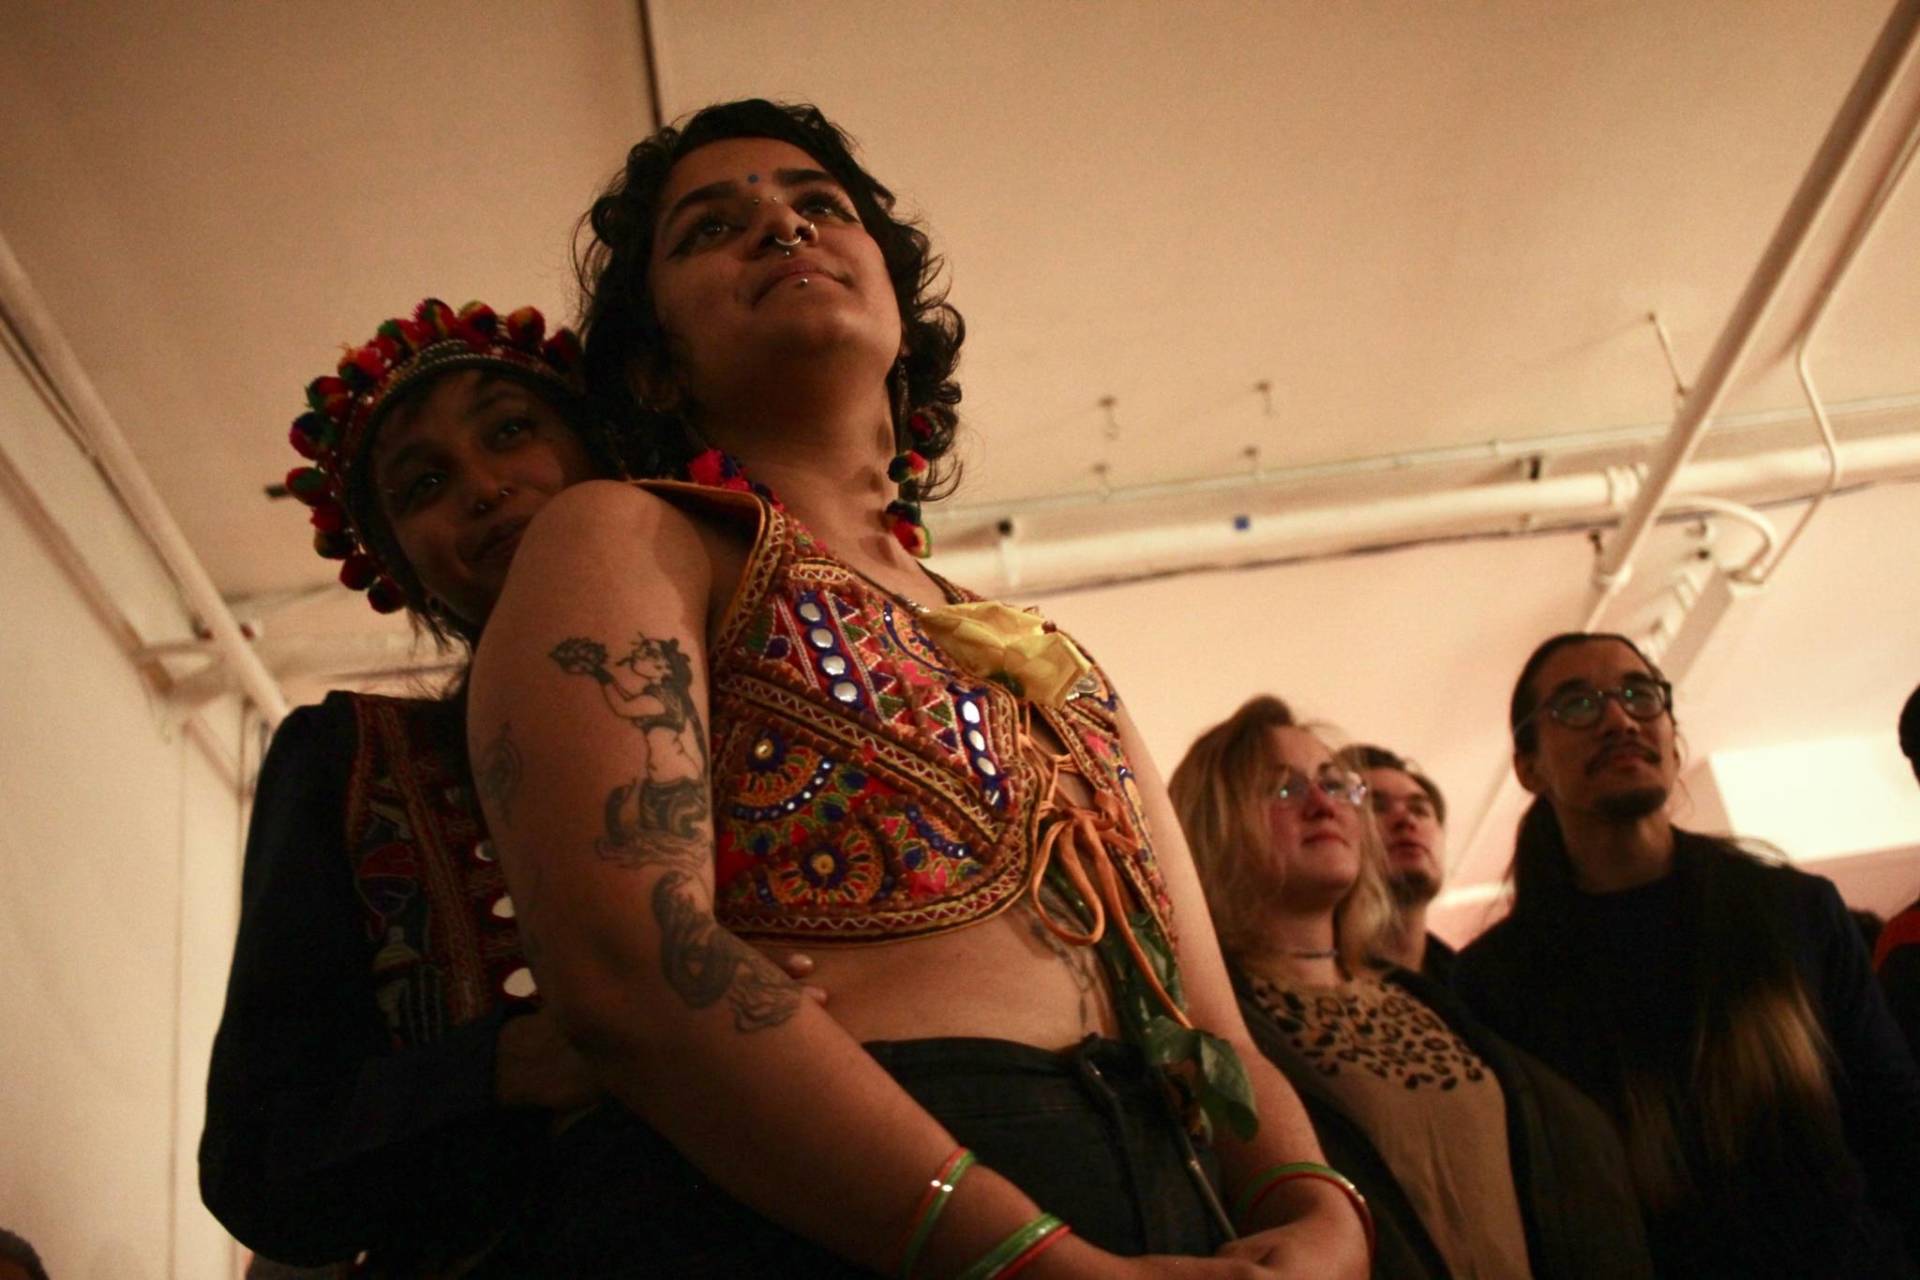 Shannon Prasad and madhvi trivedi-pathak embrace as they watch a performance on May 17, 2019.